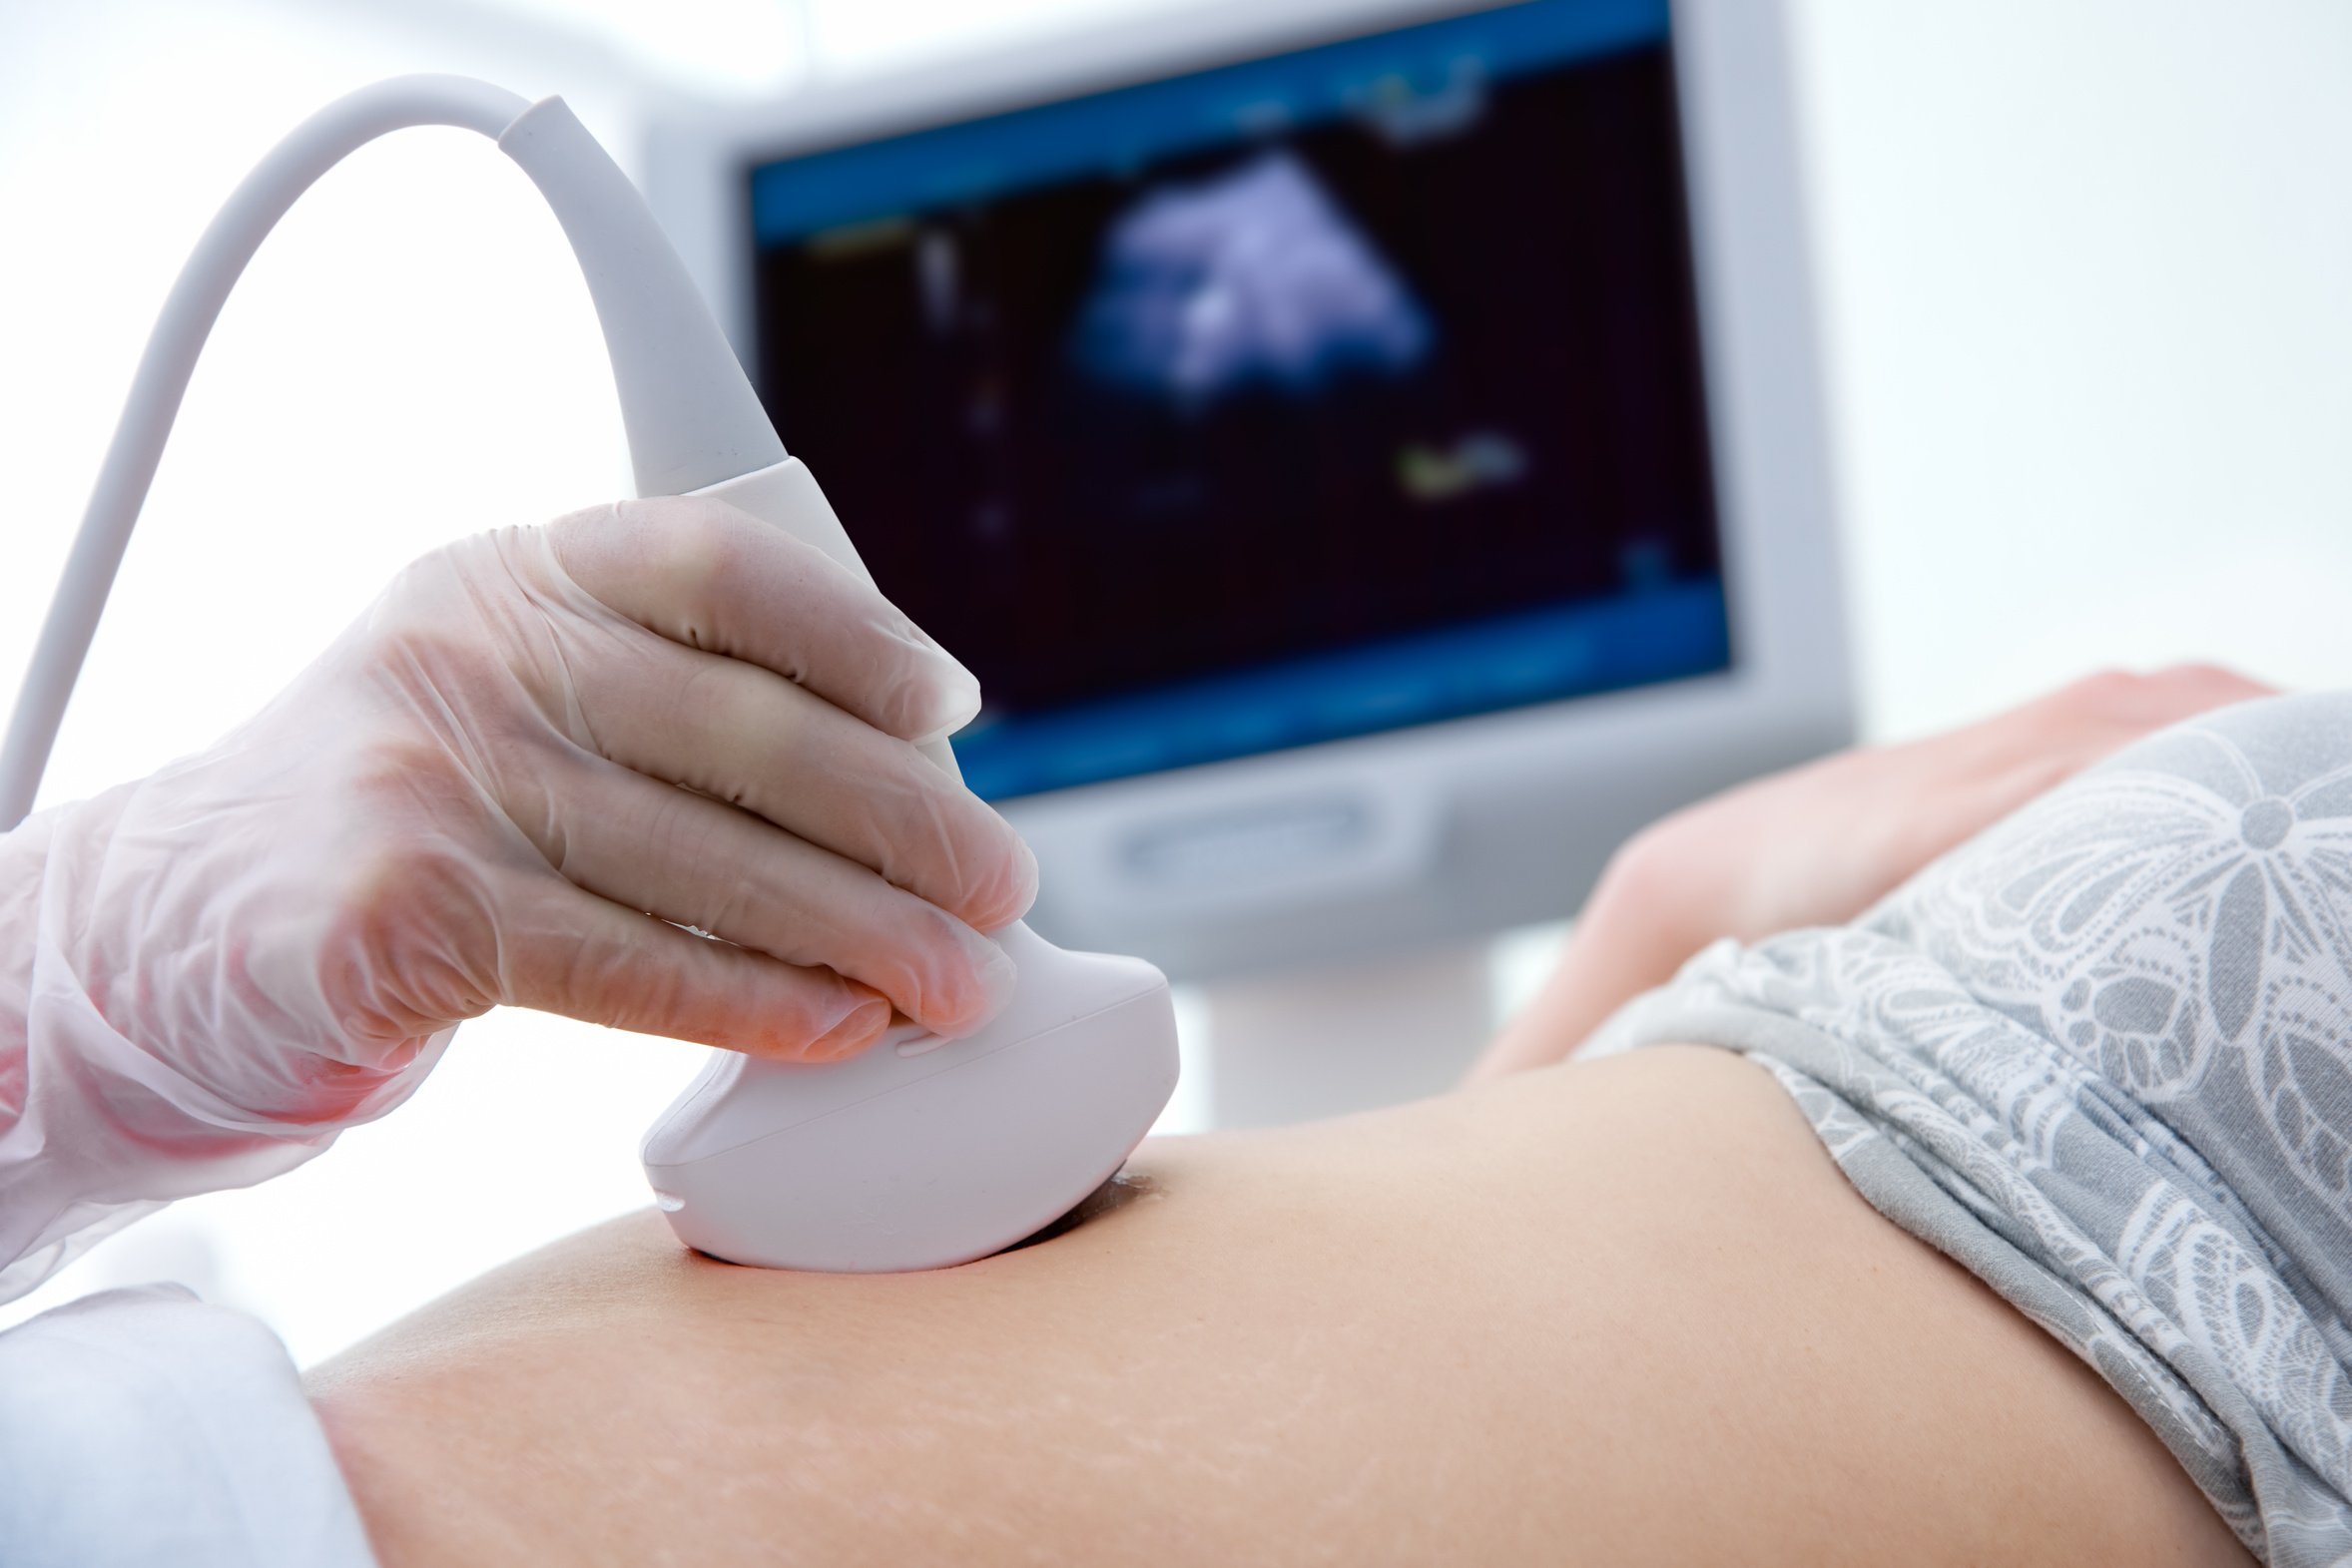   Ultrasound   Most people think of ultrasound as something that is used during pregnancy to visualize the unborn fetus. We certainly do love to use ultrasound to get an idea of how baby is doing, but the uses go even further than that. Ultrasound te